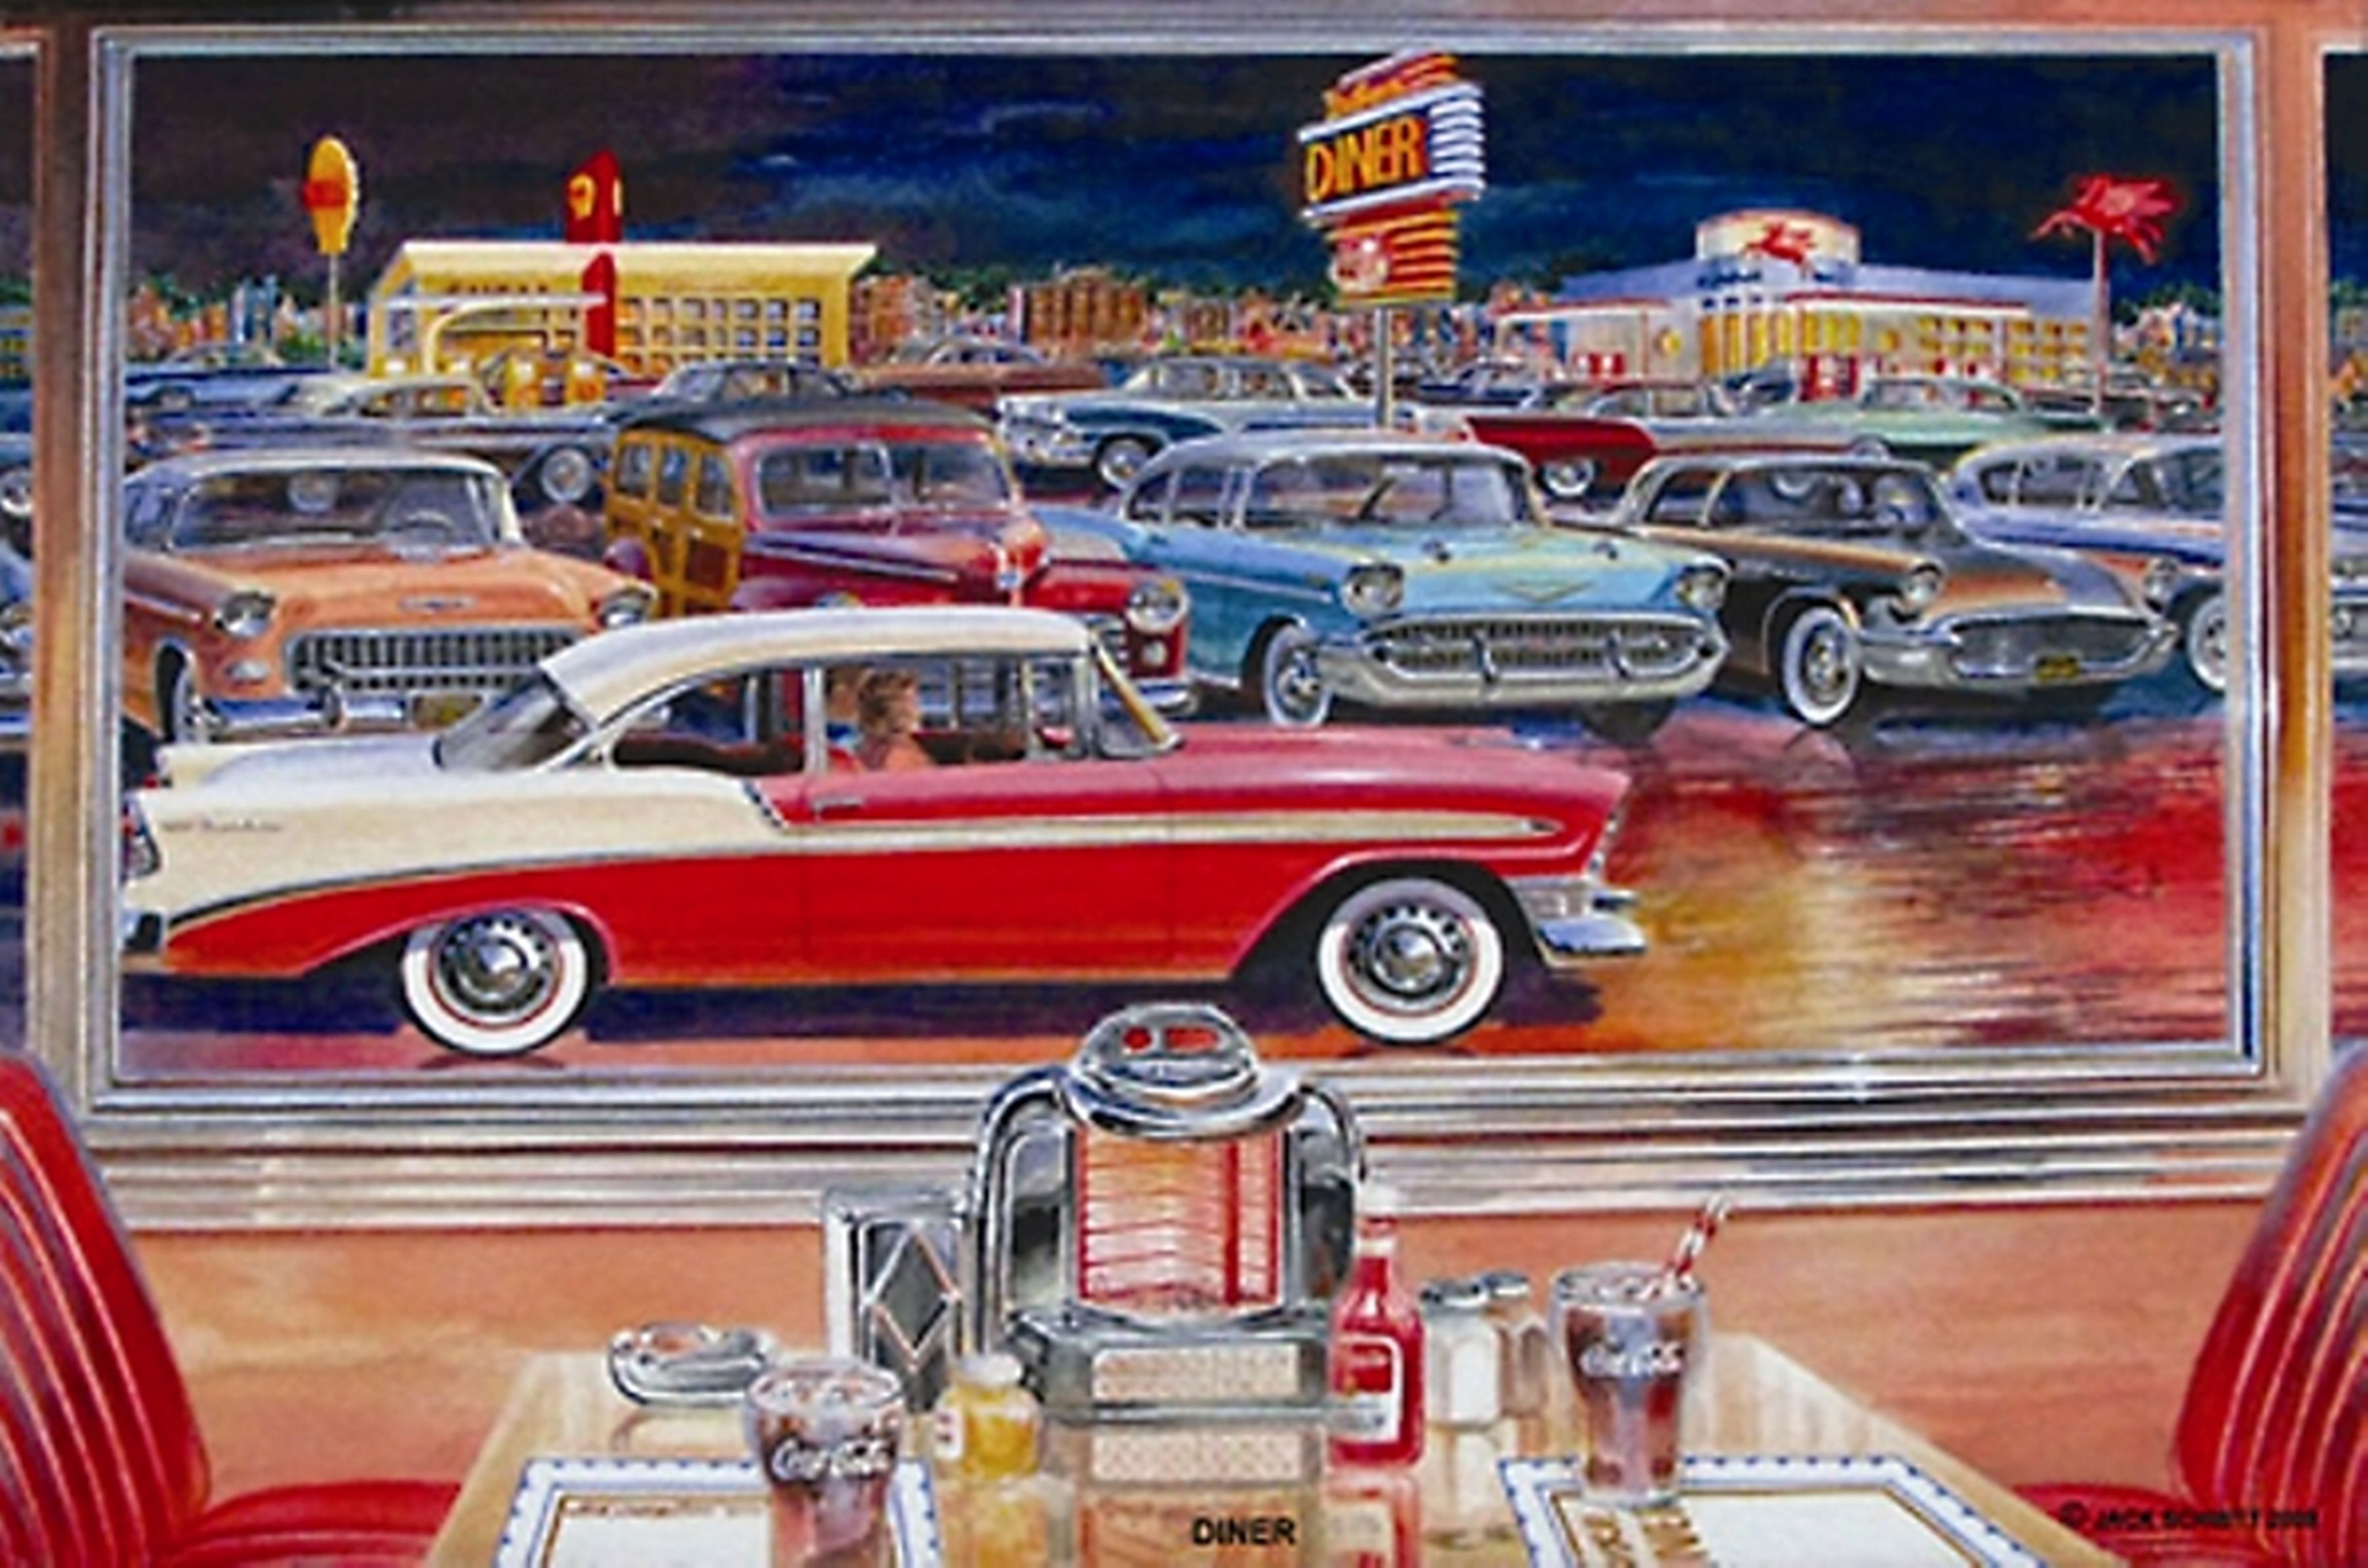 The painting of the diner and the classic cars was painted by a famous artist. - 50s, 60s